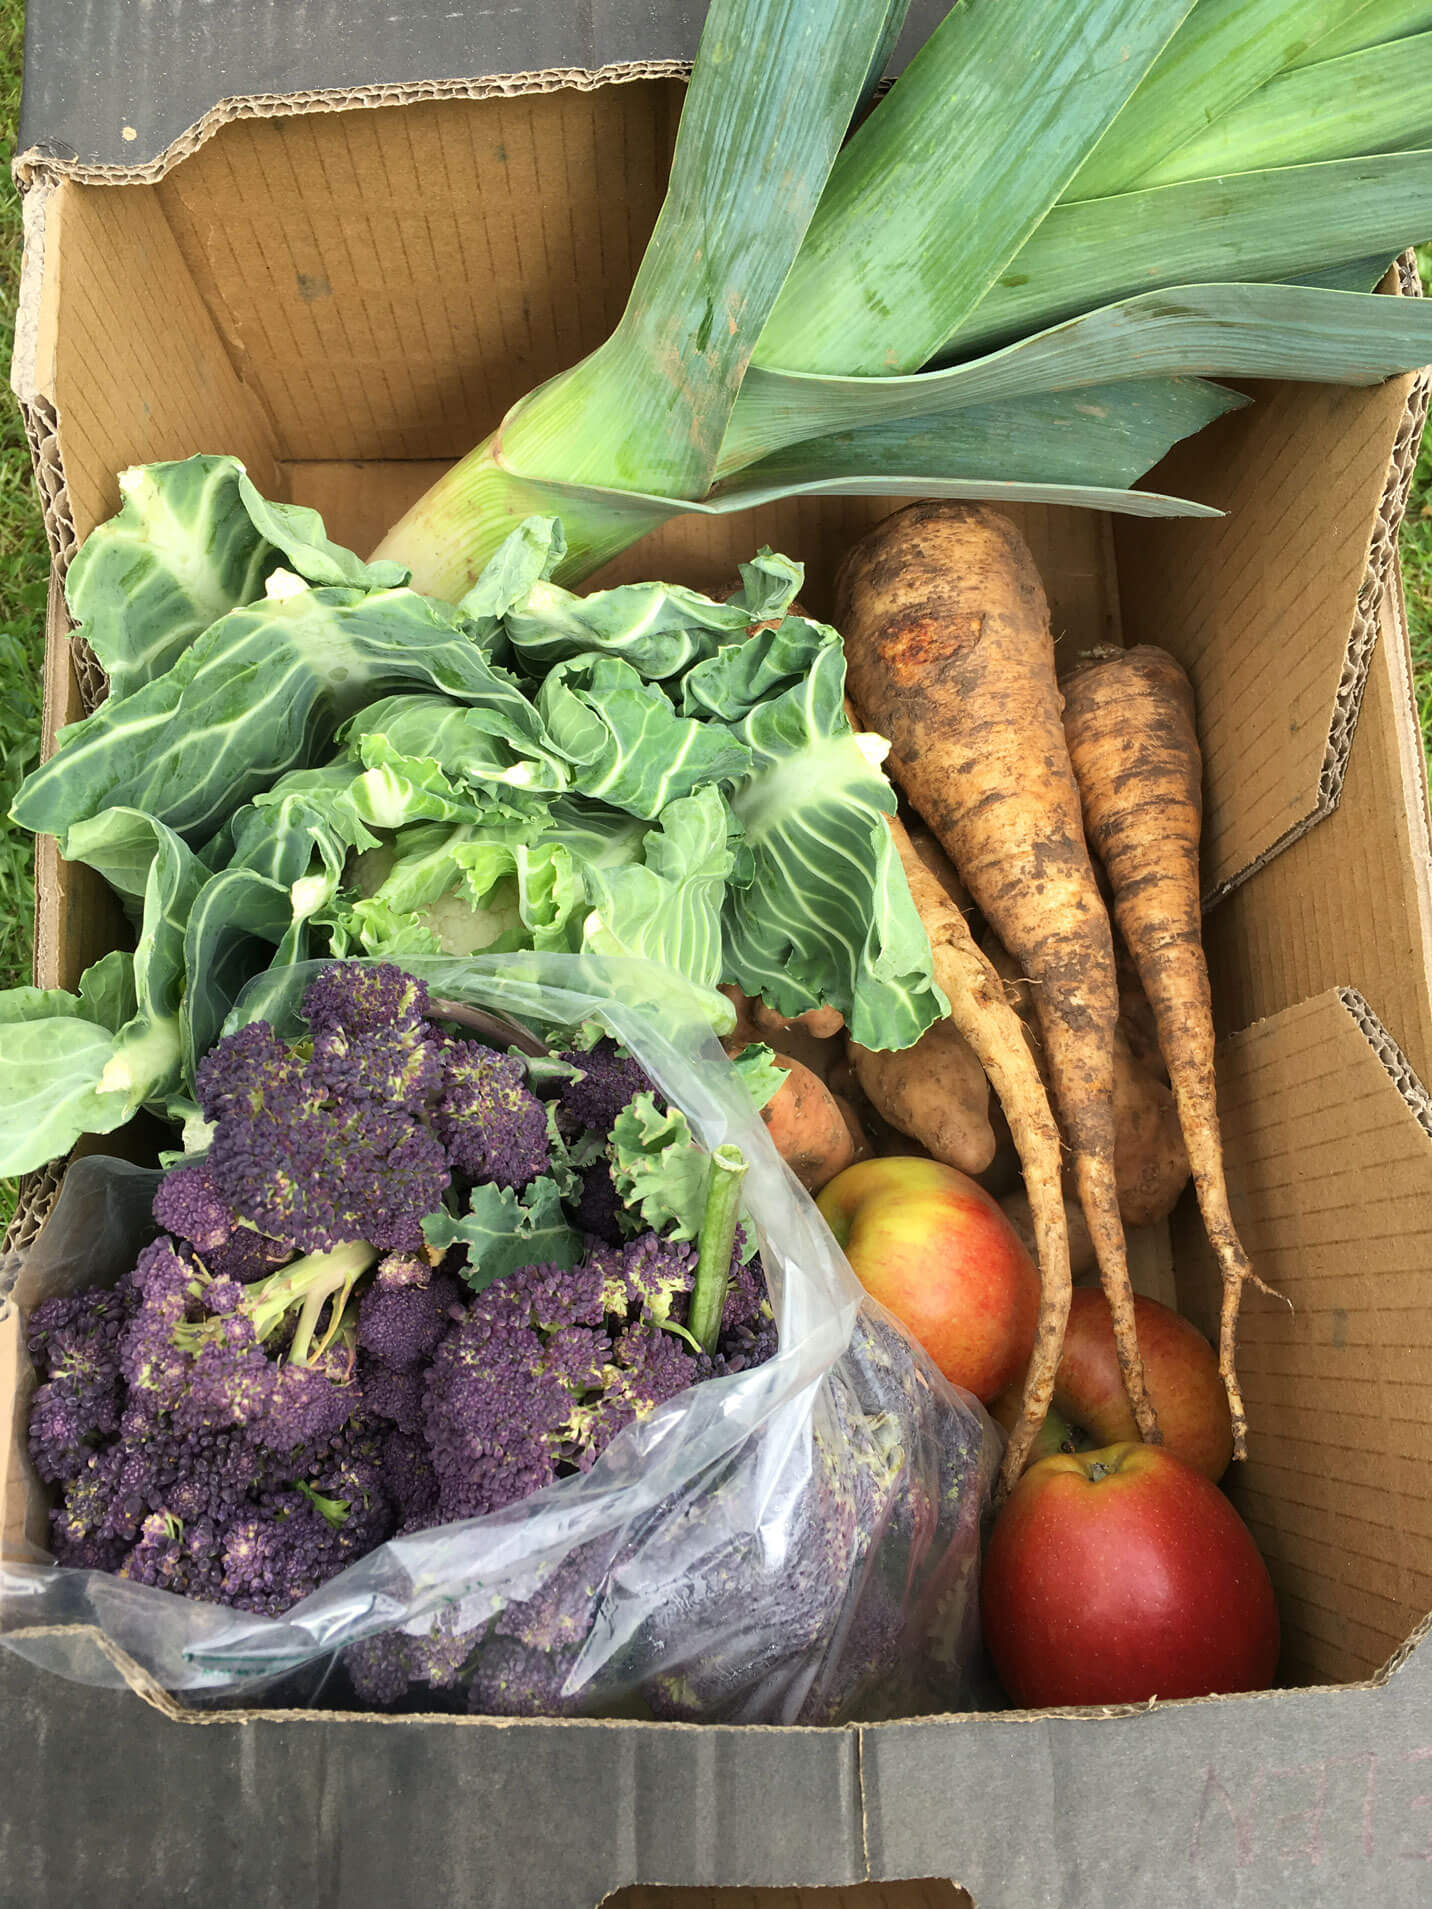 Risk management and a vegetable box